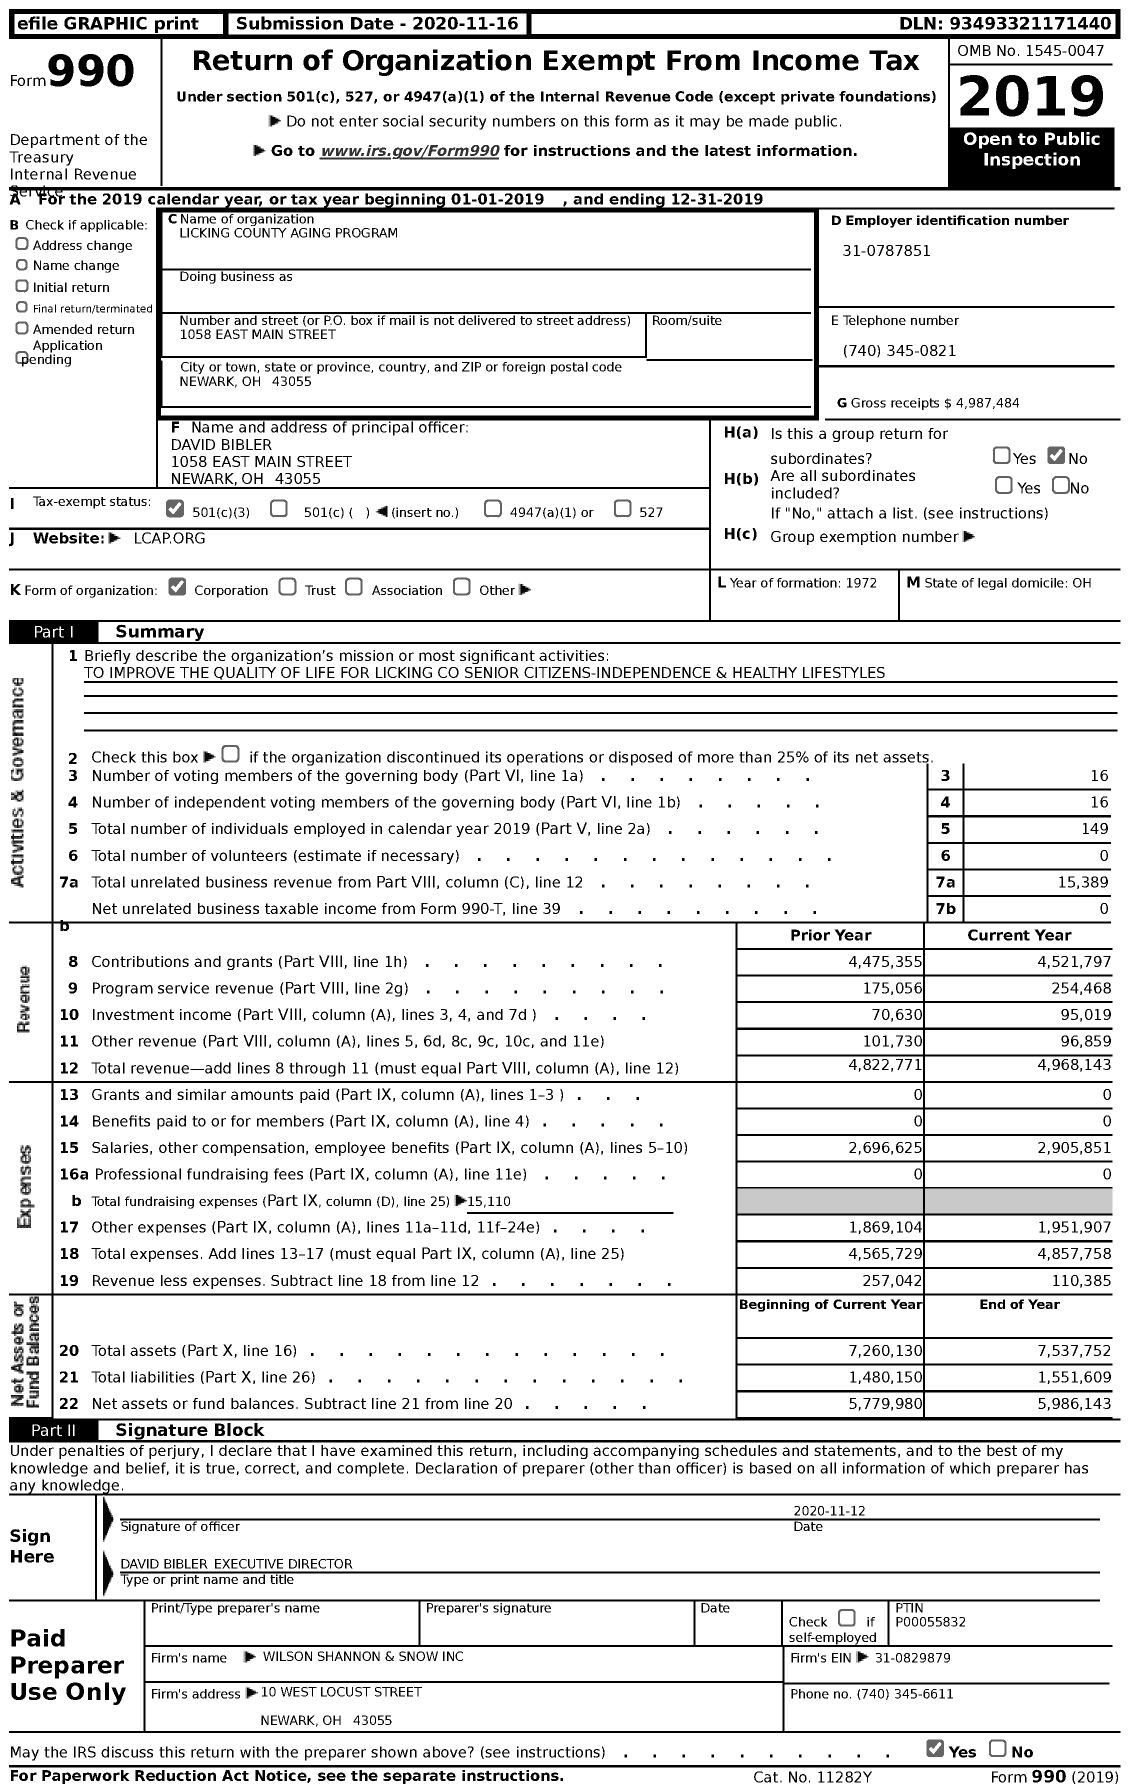 Image of first page of 2019 Form 990 for Licking County Aging Program (LCAP)